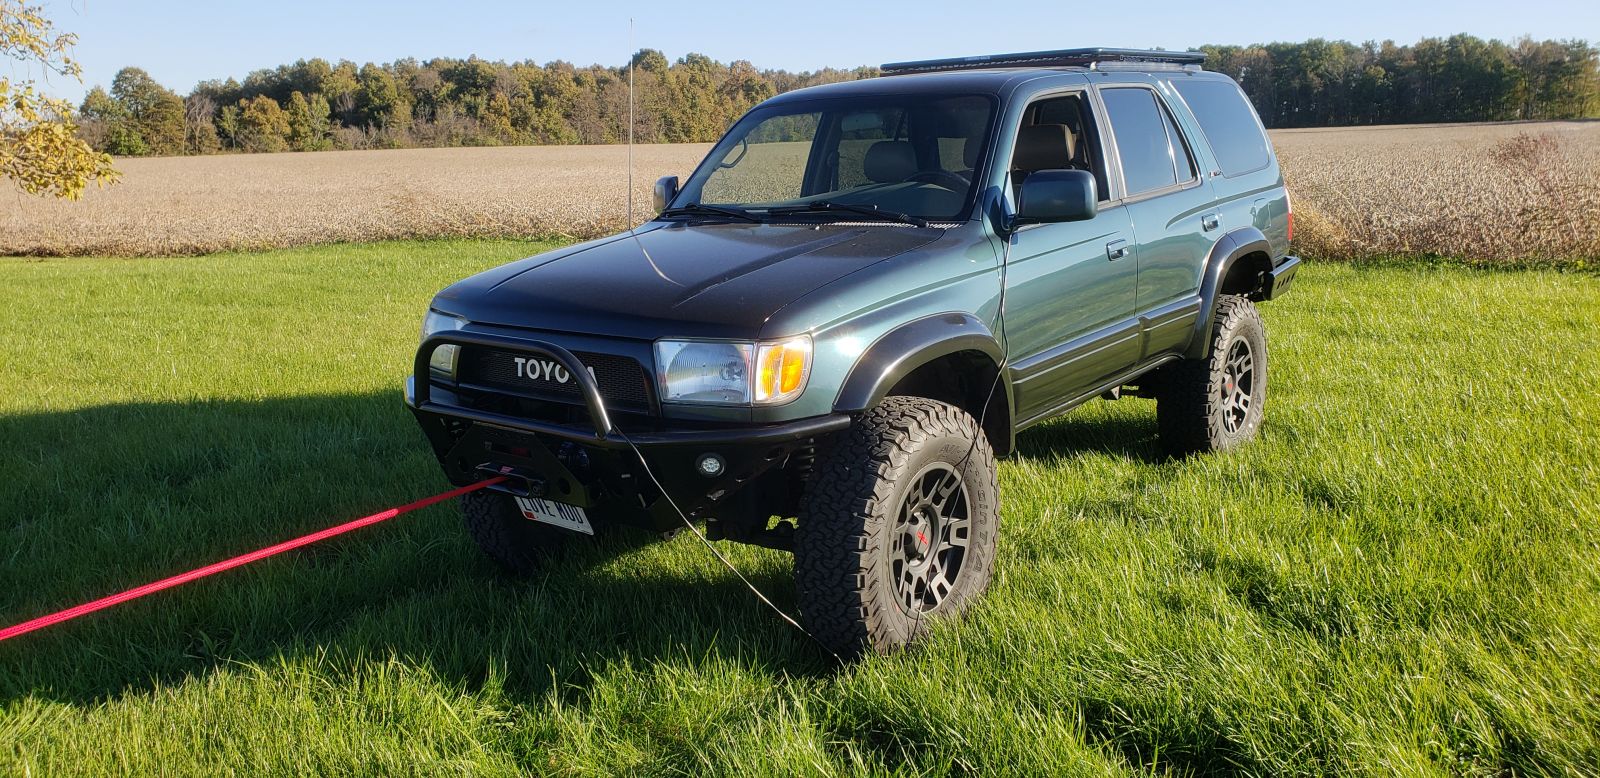 Illustration for article titled Front Bumper/Winch Installed on Project 4Runner